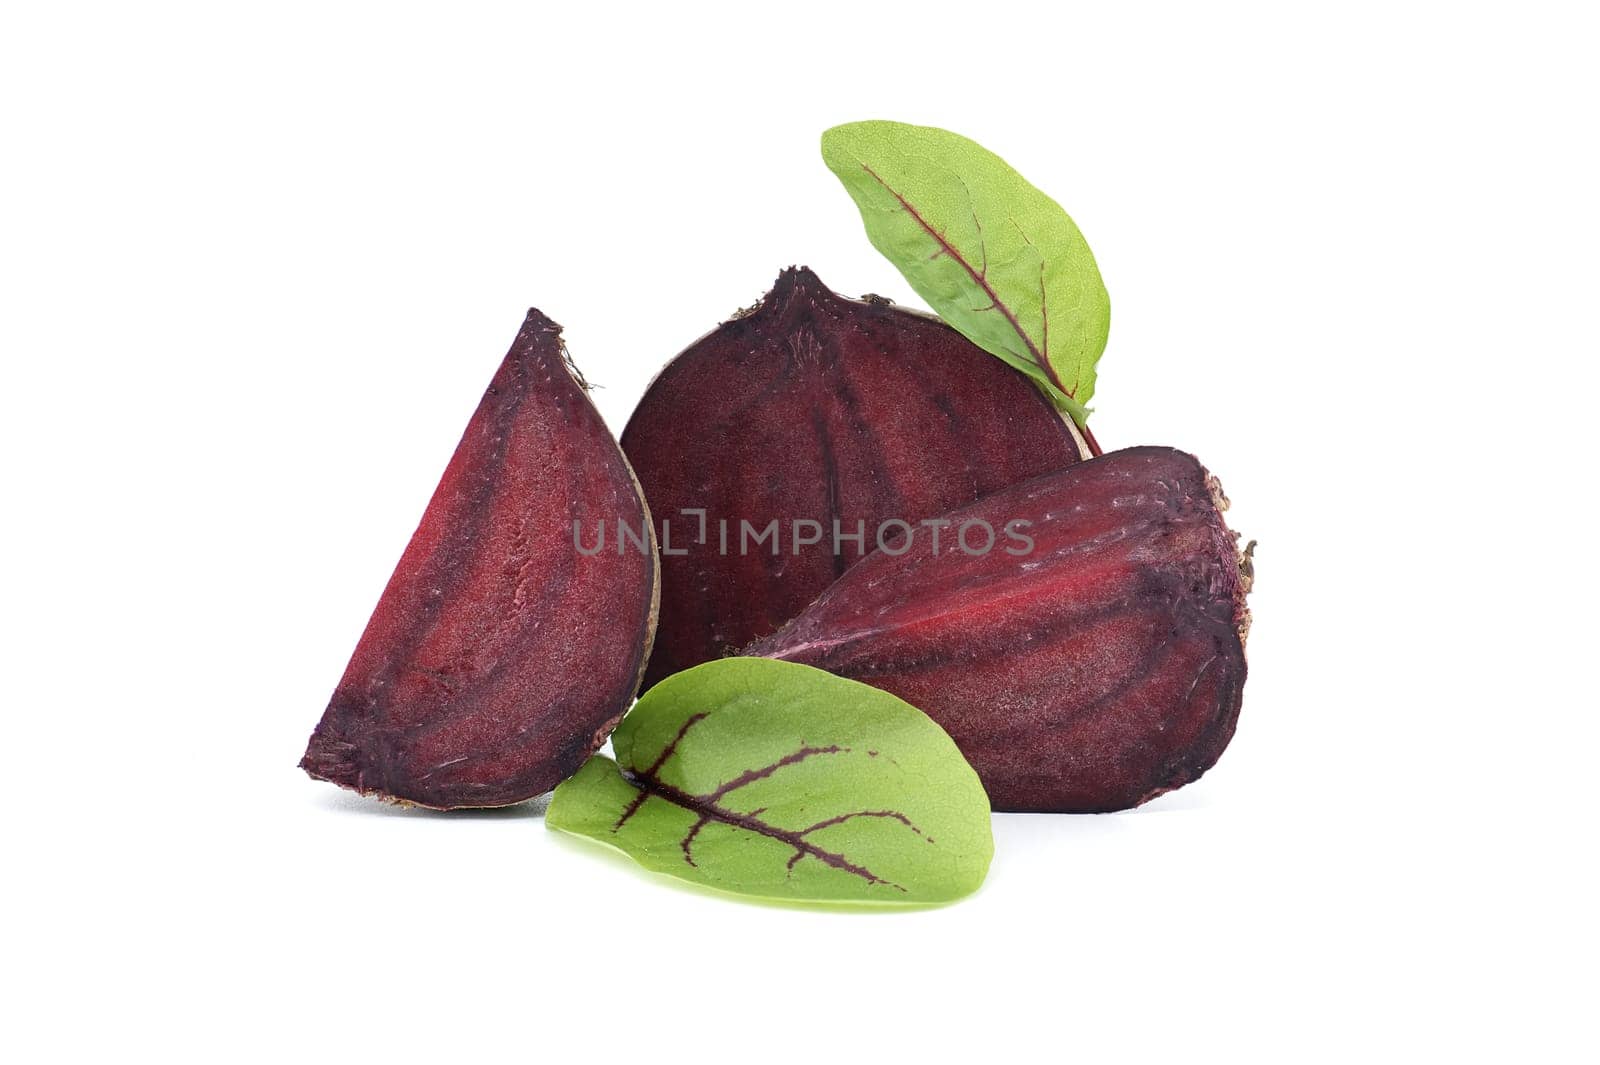 Slices of beetroot revealing their vibrant purple interiors complete with their fresh green leaves isolated on white background